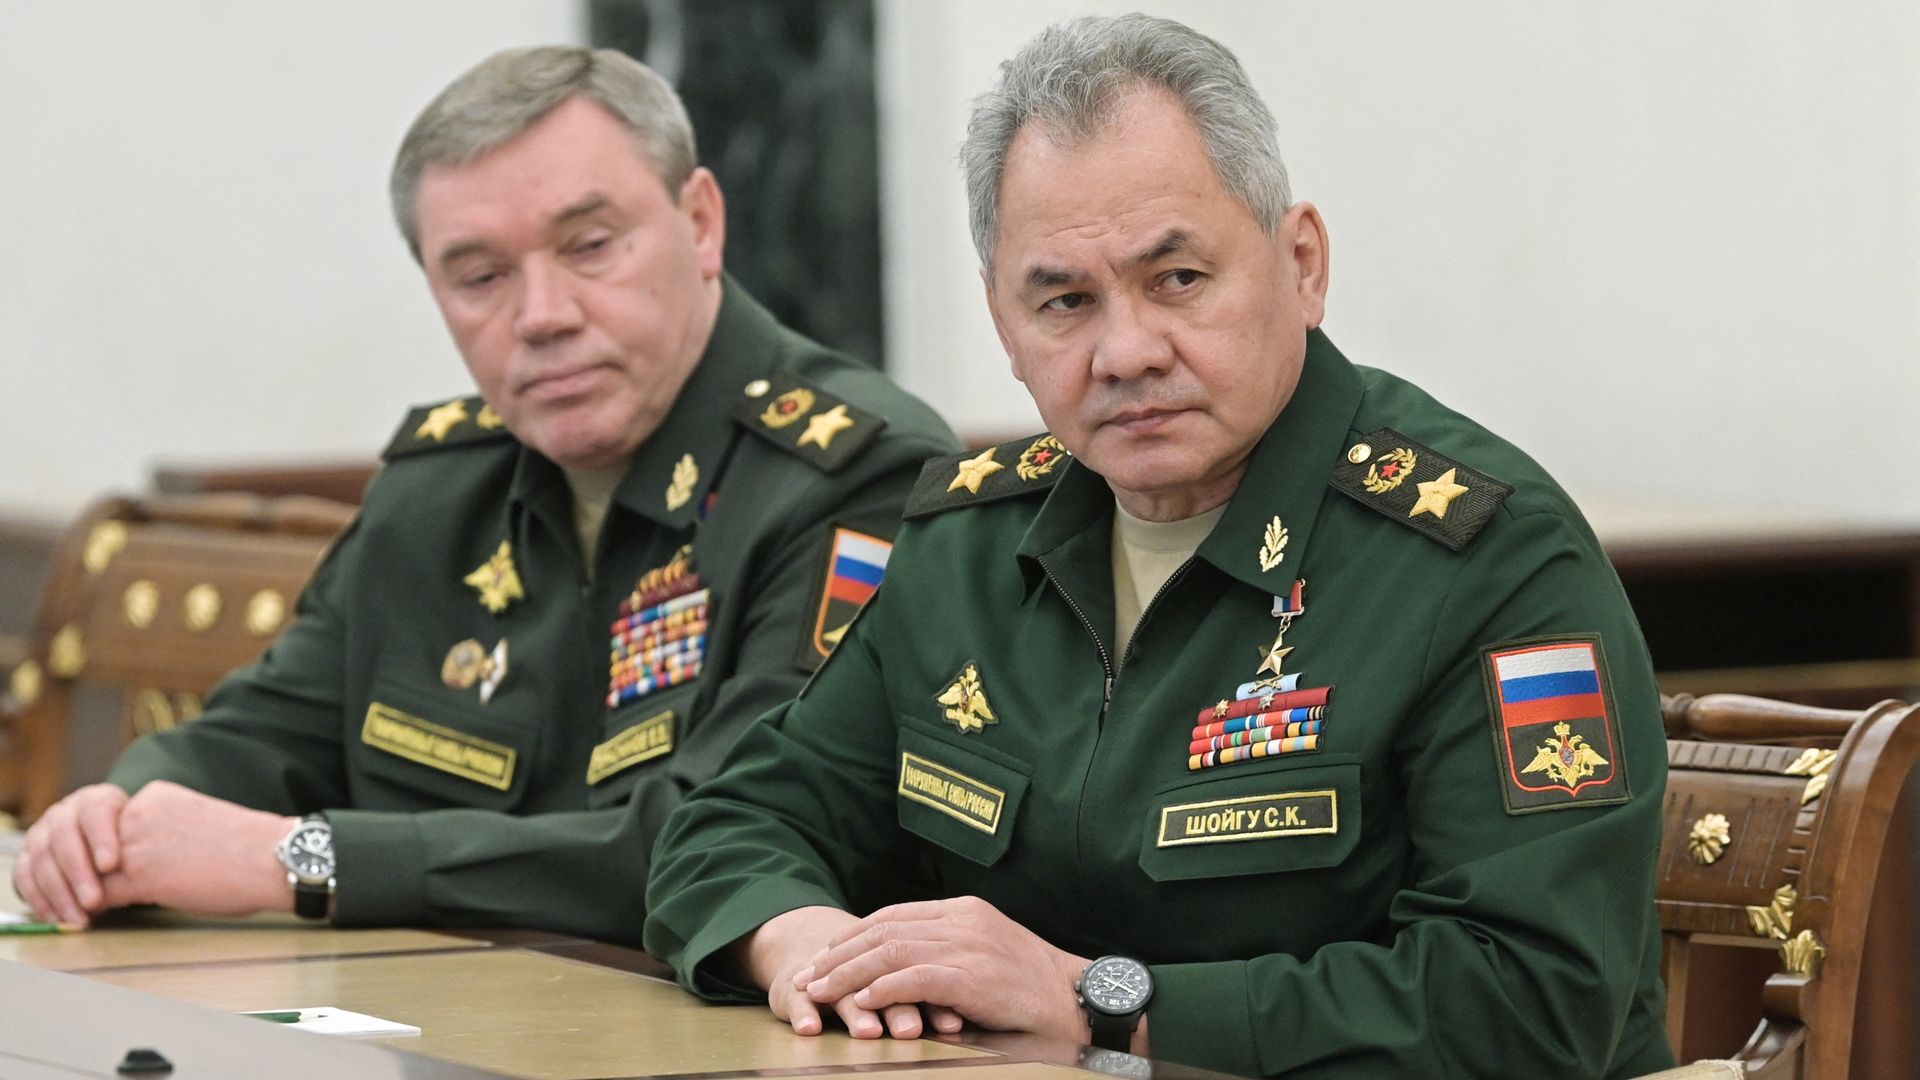 Russian Defense Minister Sergei Shoigu (R) with chief of the general staff Valery Gerasimov during a meeting with President Vladimir Putin in Moscow in February 2022.